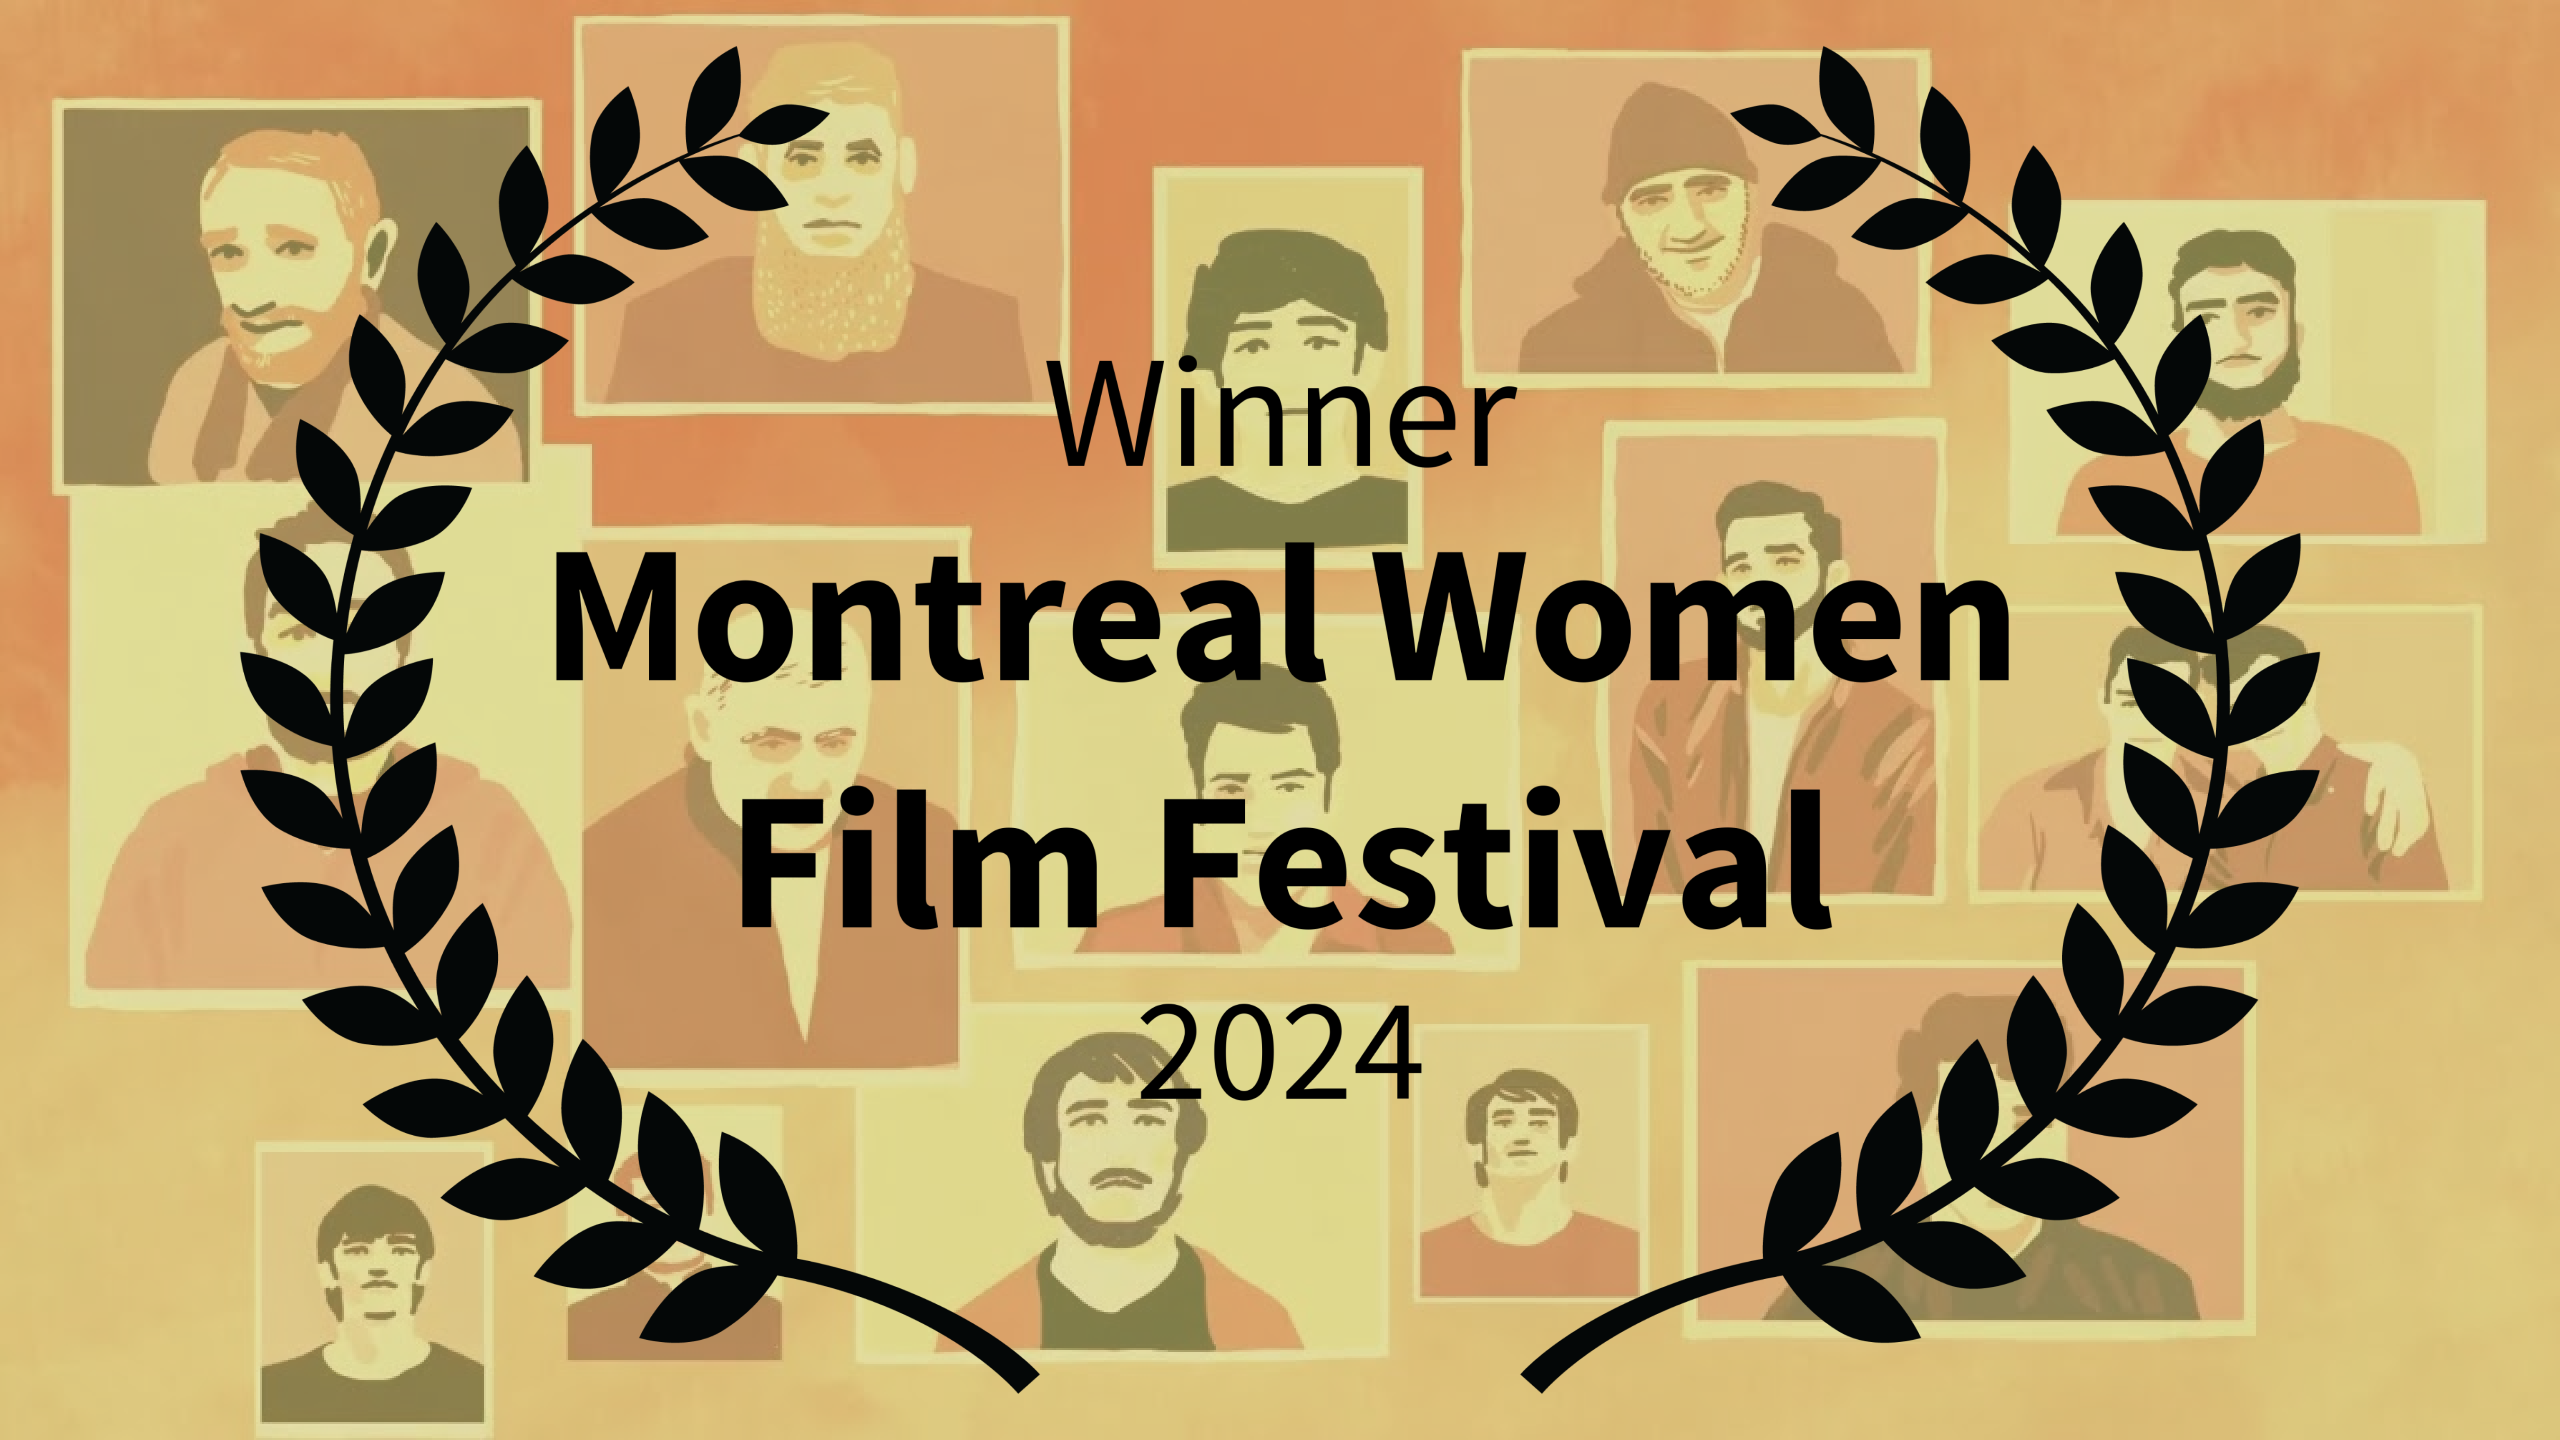 Short film “Neither Living Nor Dead” won the Best Short Animation award at the Montreal